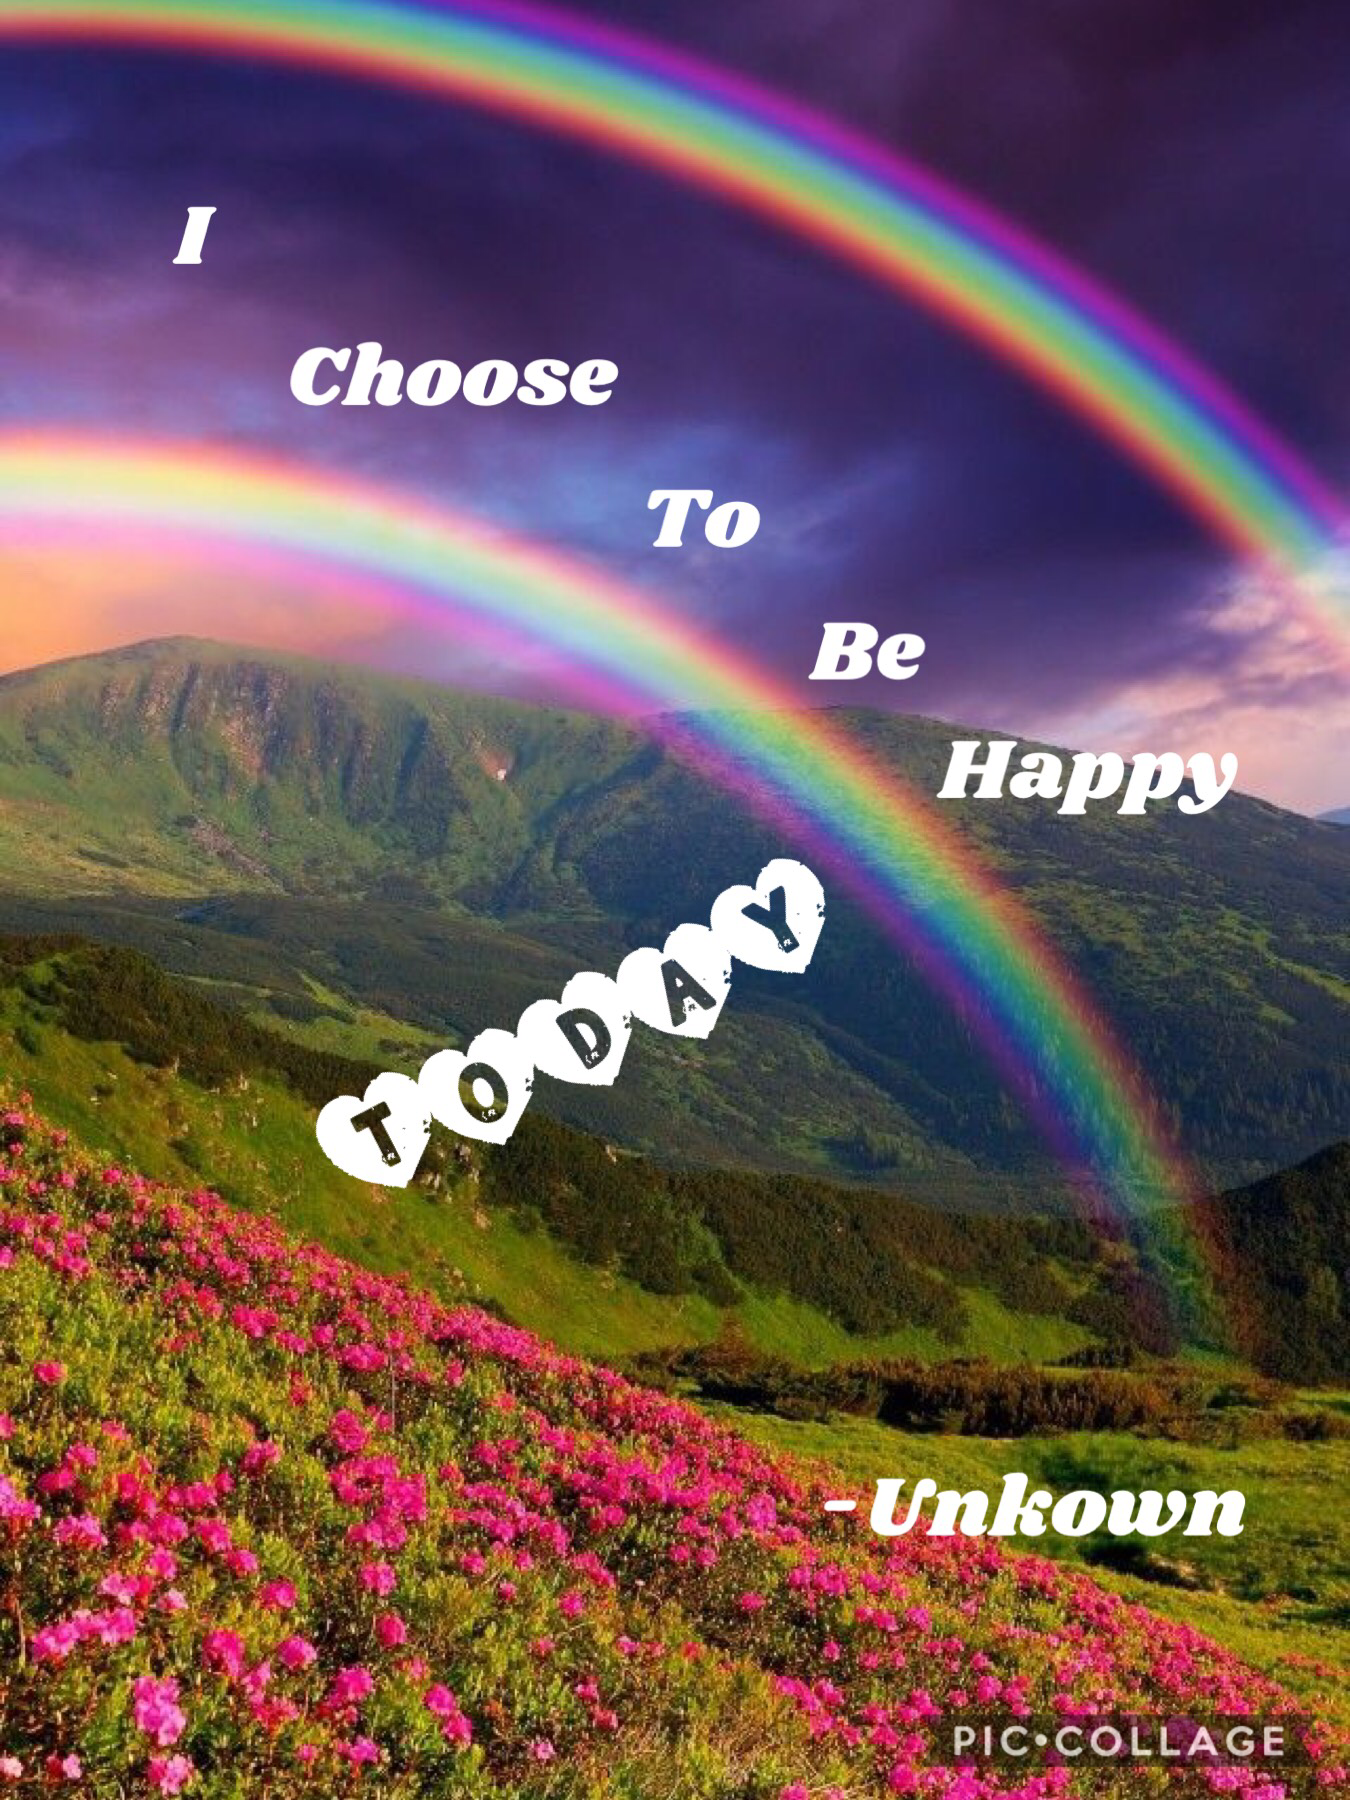 "I choose to be happy today." -Unknown